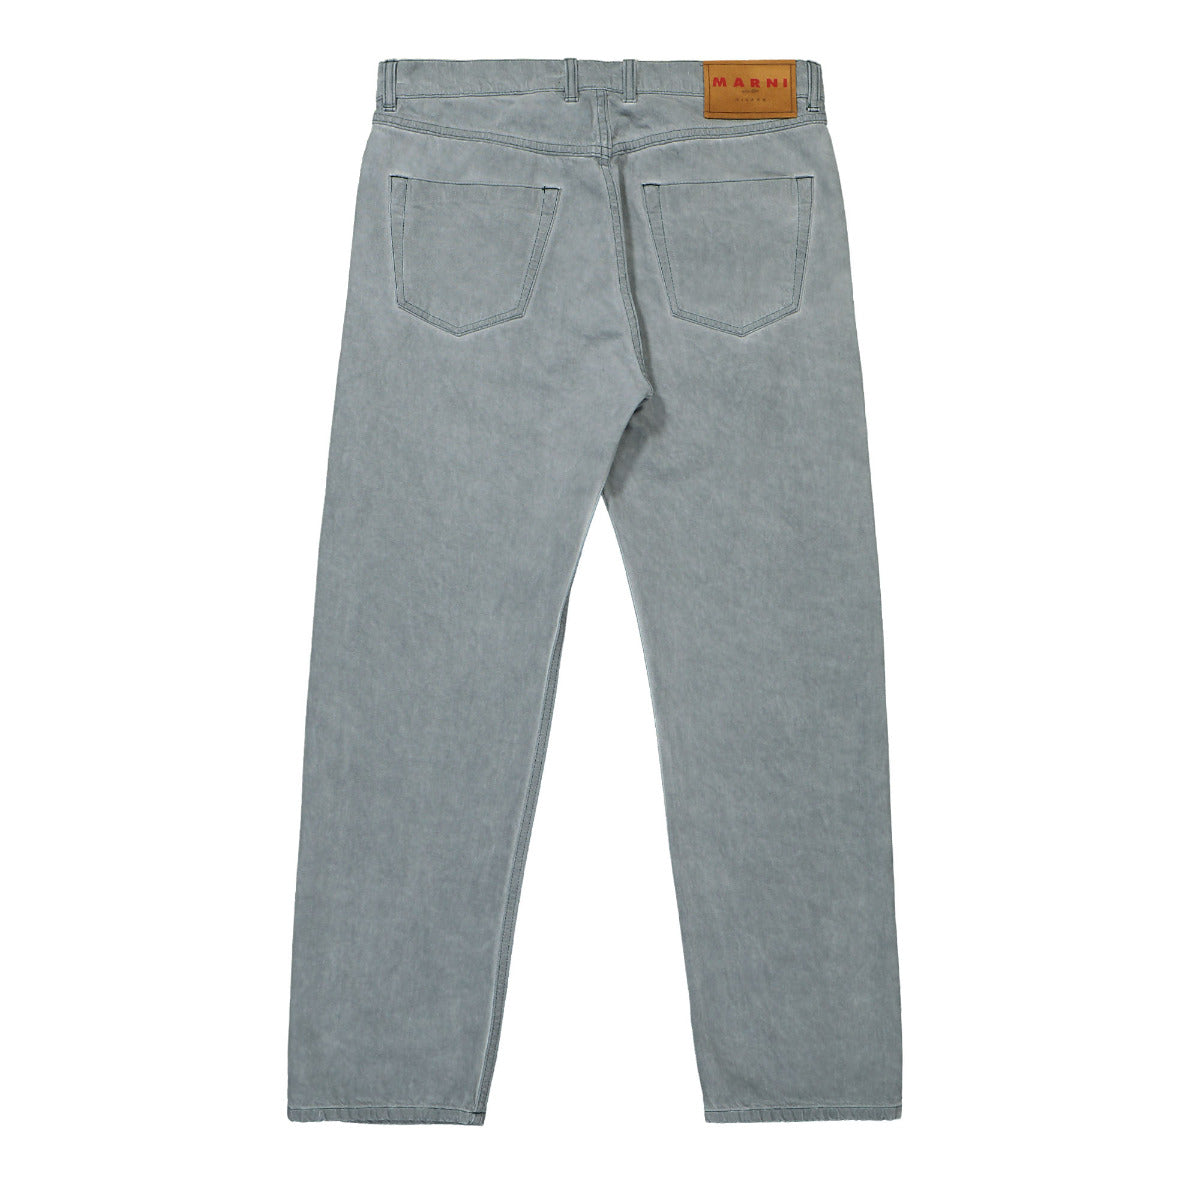 Pigment Garment Dyed Drill Pant